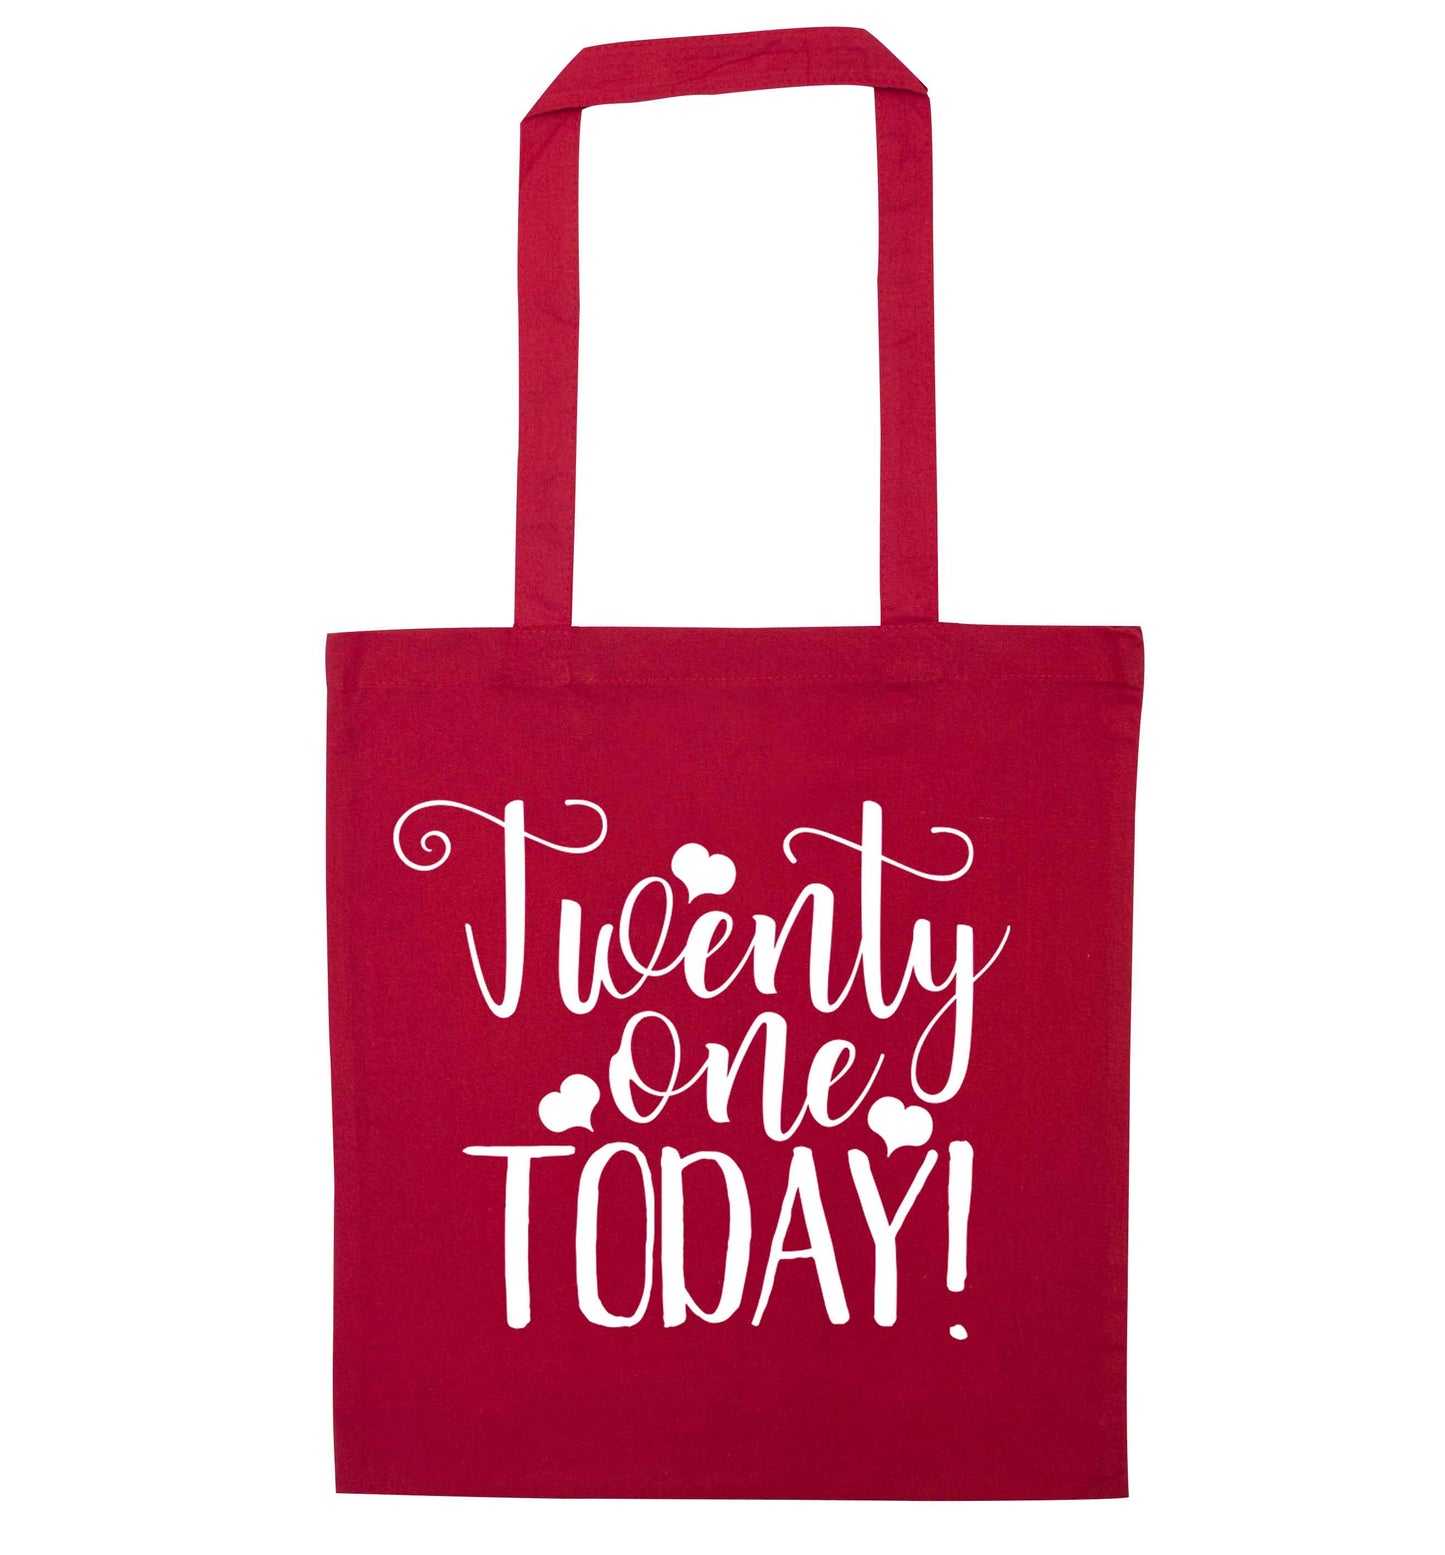 Twenty one today!red tote bag